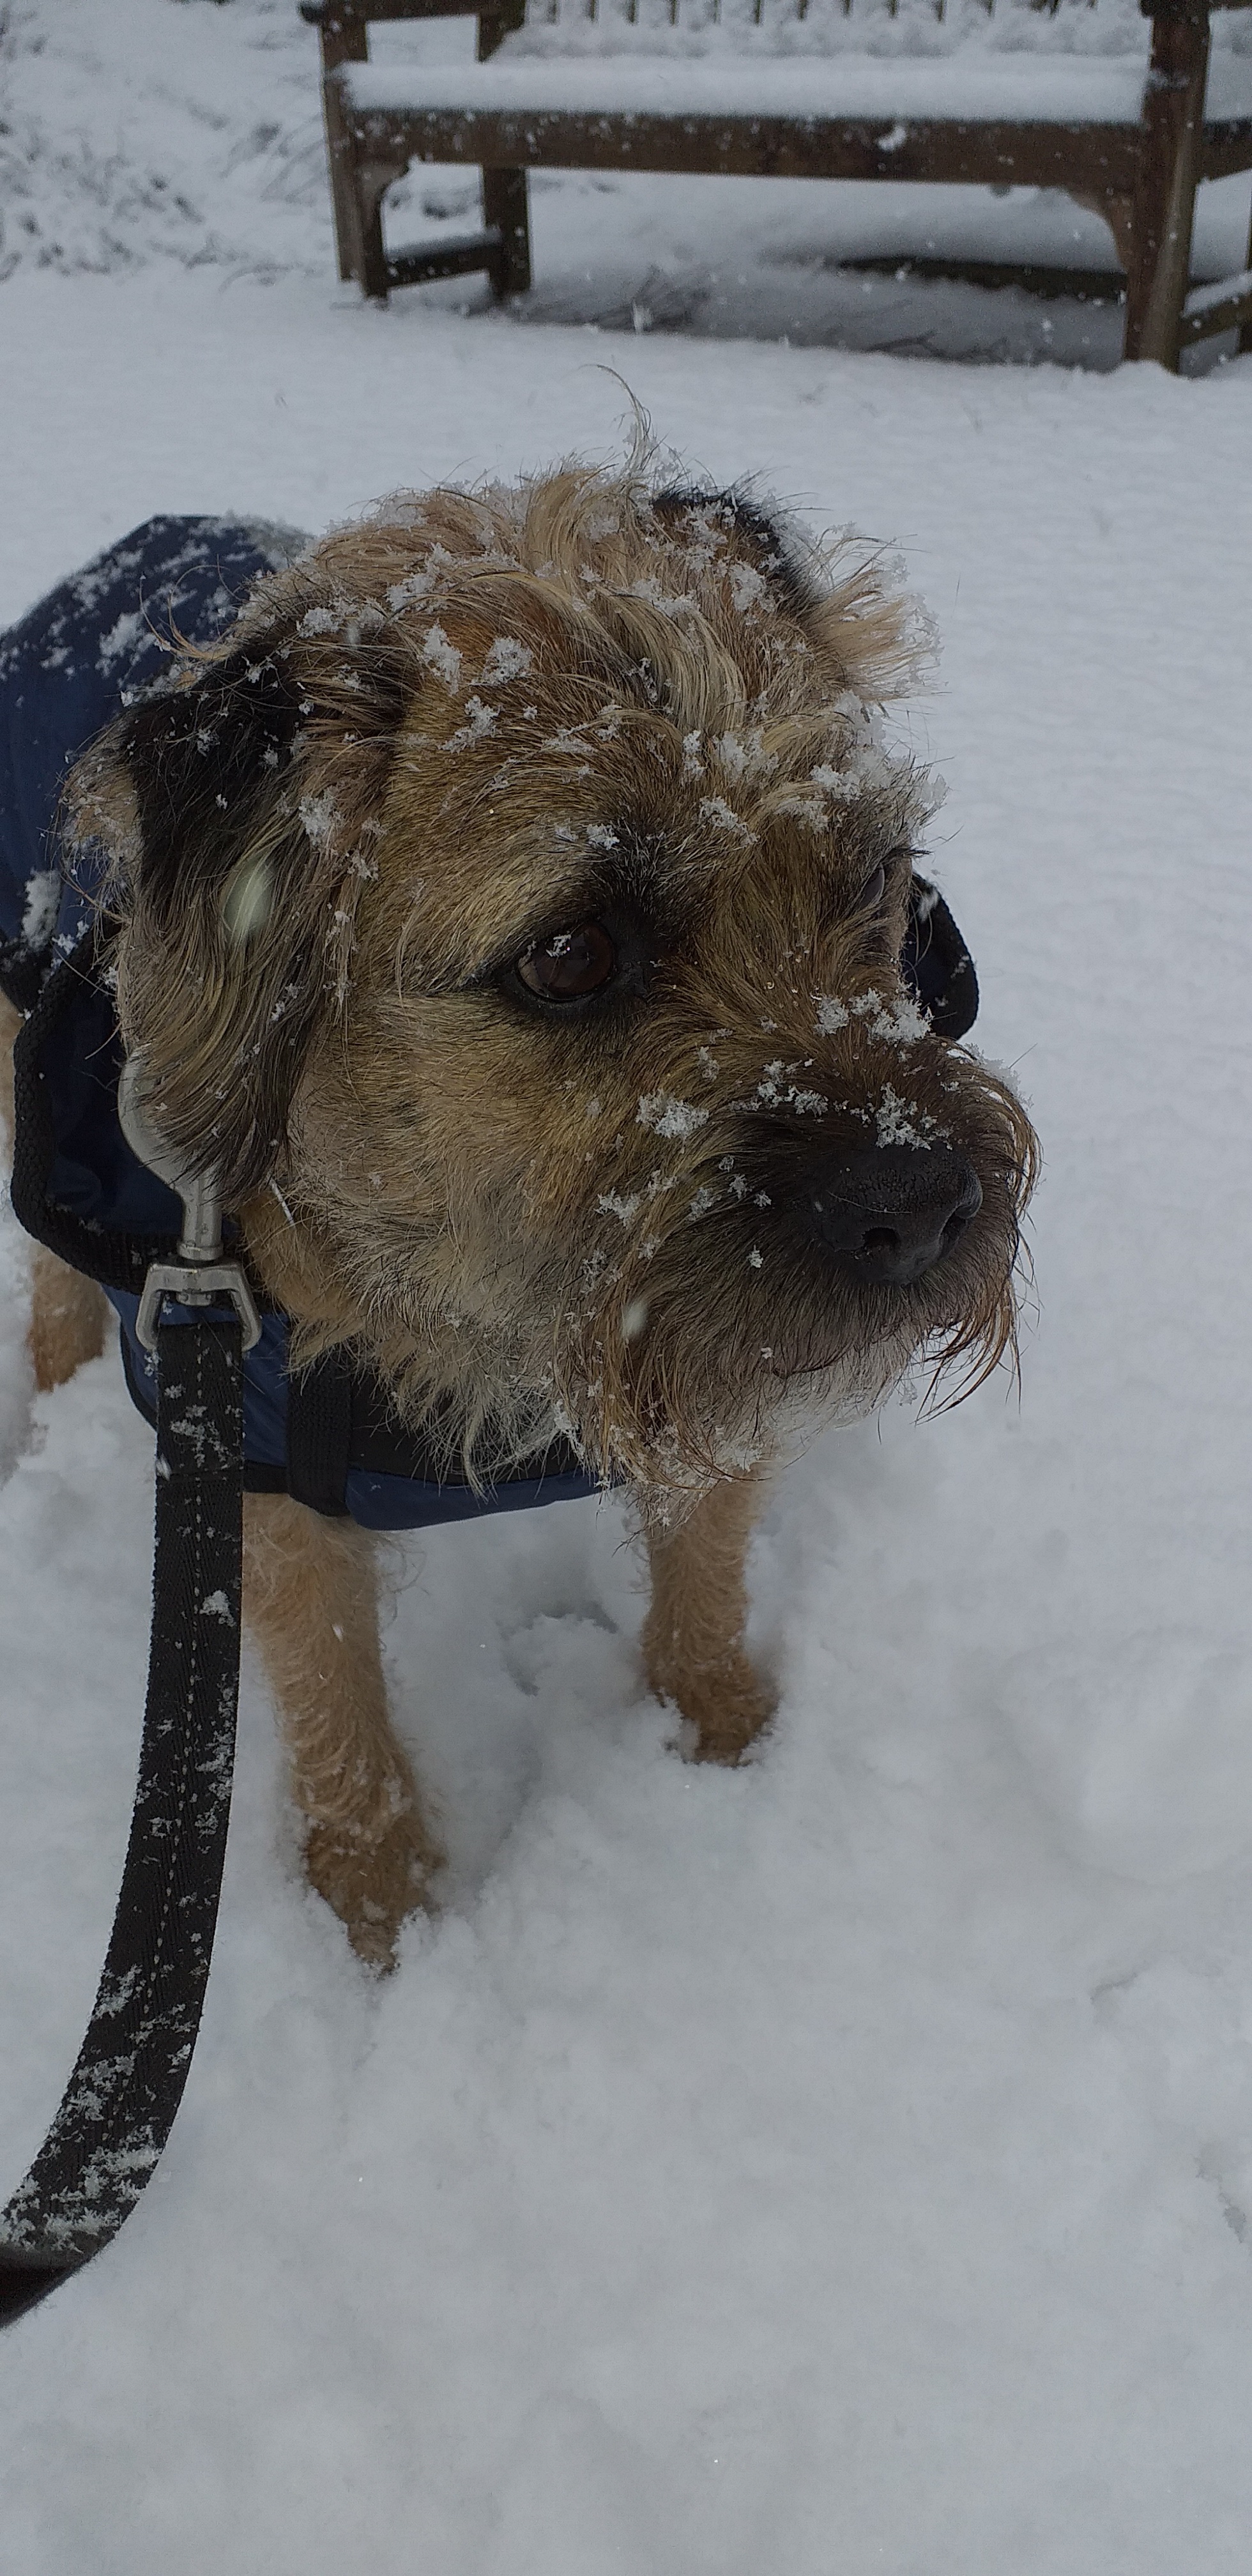 Sharon Rowley, from Wrexham, shared a photo of her boarder terrier Ianto in the snow.